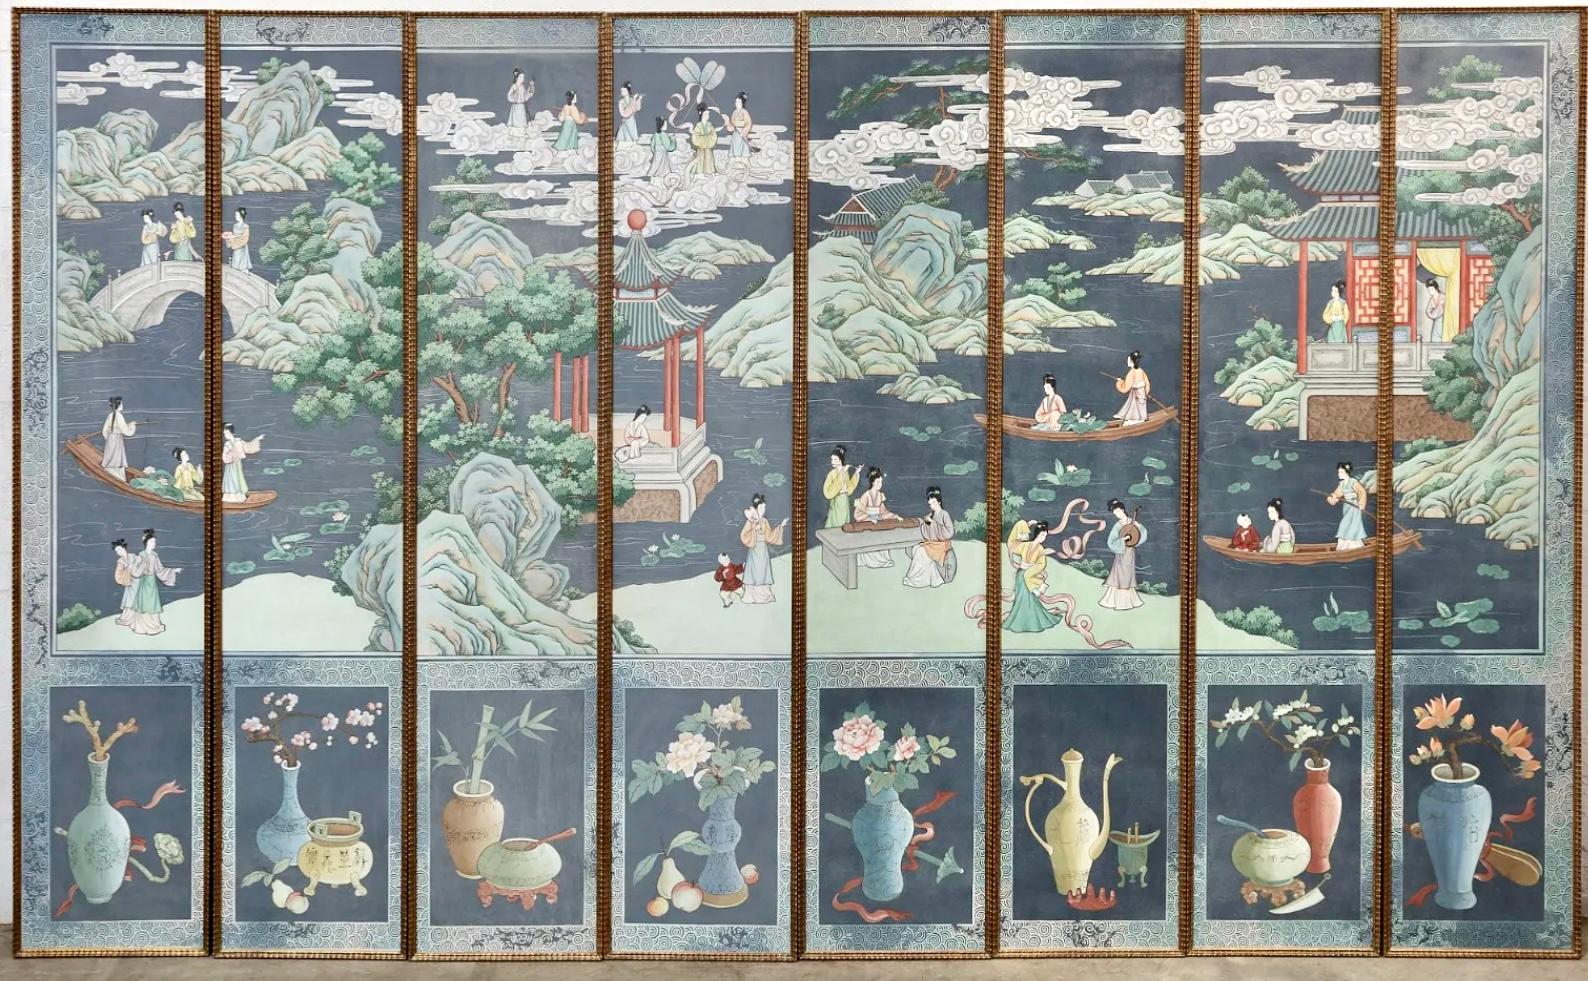 Stunning set of eight Chinese Wallpaper Chinoiserie painted panels. Mounted in ripple carved giltwood frames. Each panel can stand on it's own or together panels tell a story with Asian characters and scenery. Bottom of each panel features a Chinese